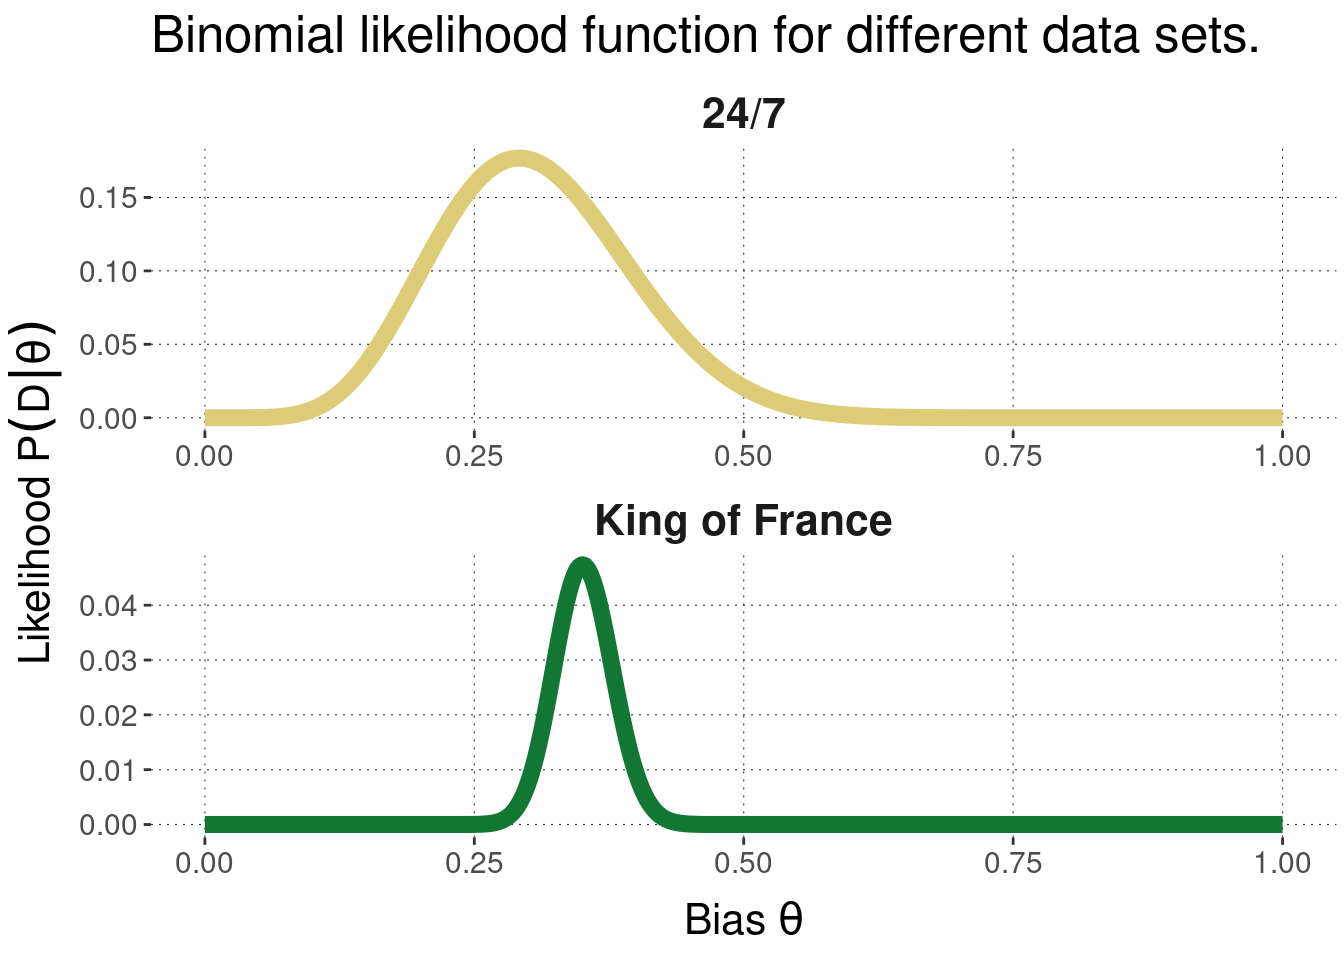 Likelihood for two examples of binomial data. The first example has $k = 7$ and $N = 24$. The second has $k = 109$ and $N = 311$.